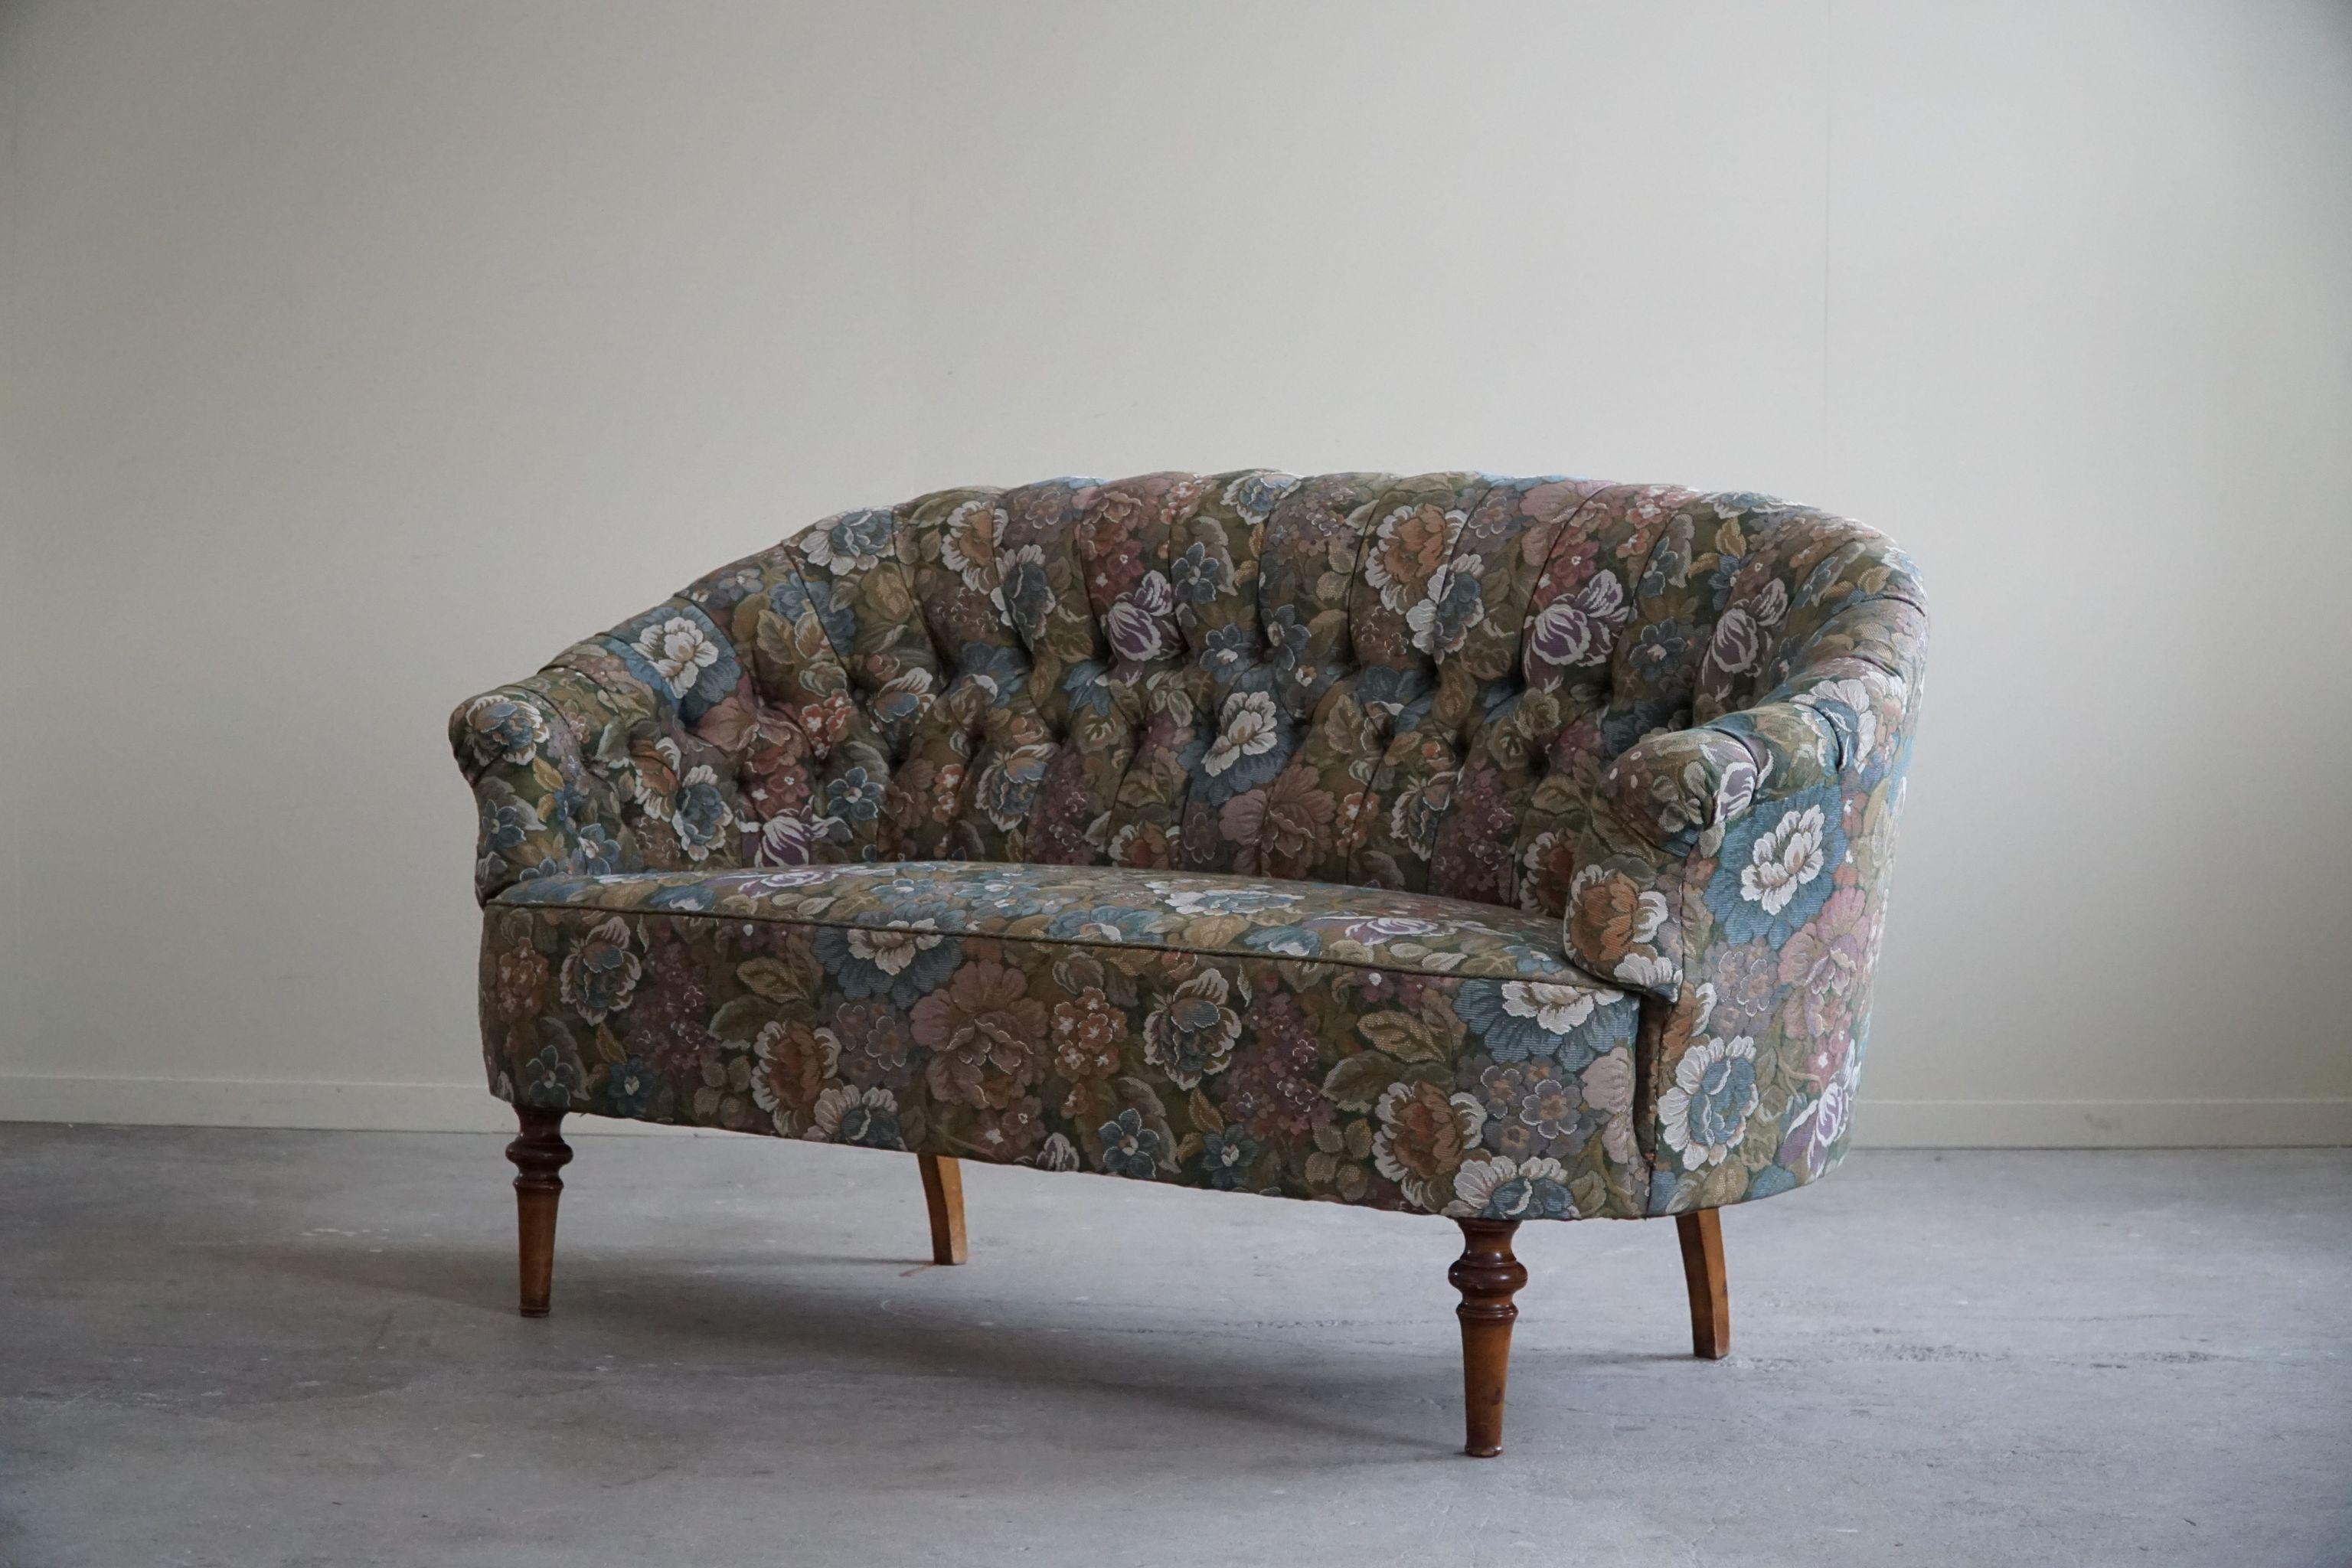 Antique Curved Sofa with Flora Fabric, By a Danish Cabinetmaker, Early 1900s 6